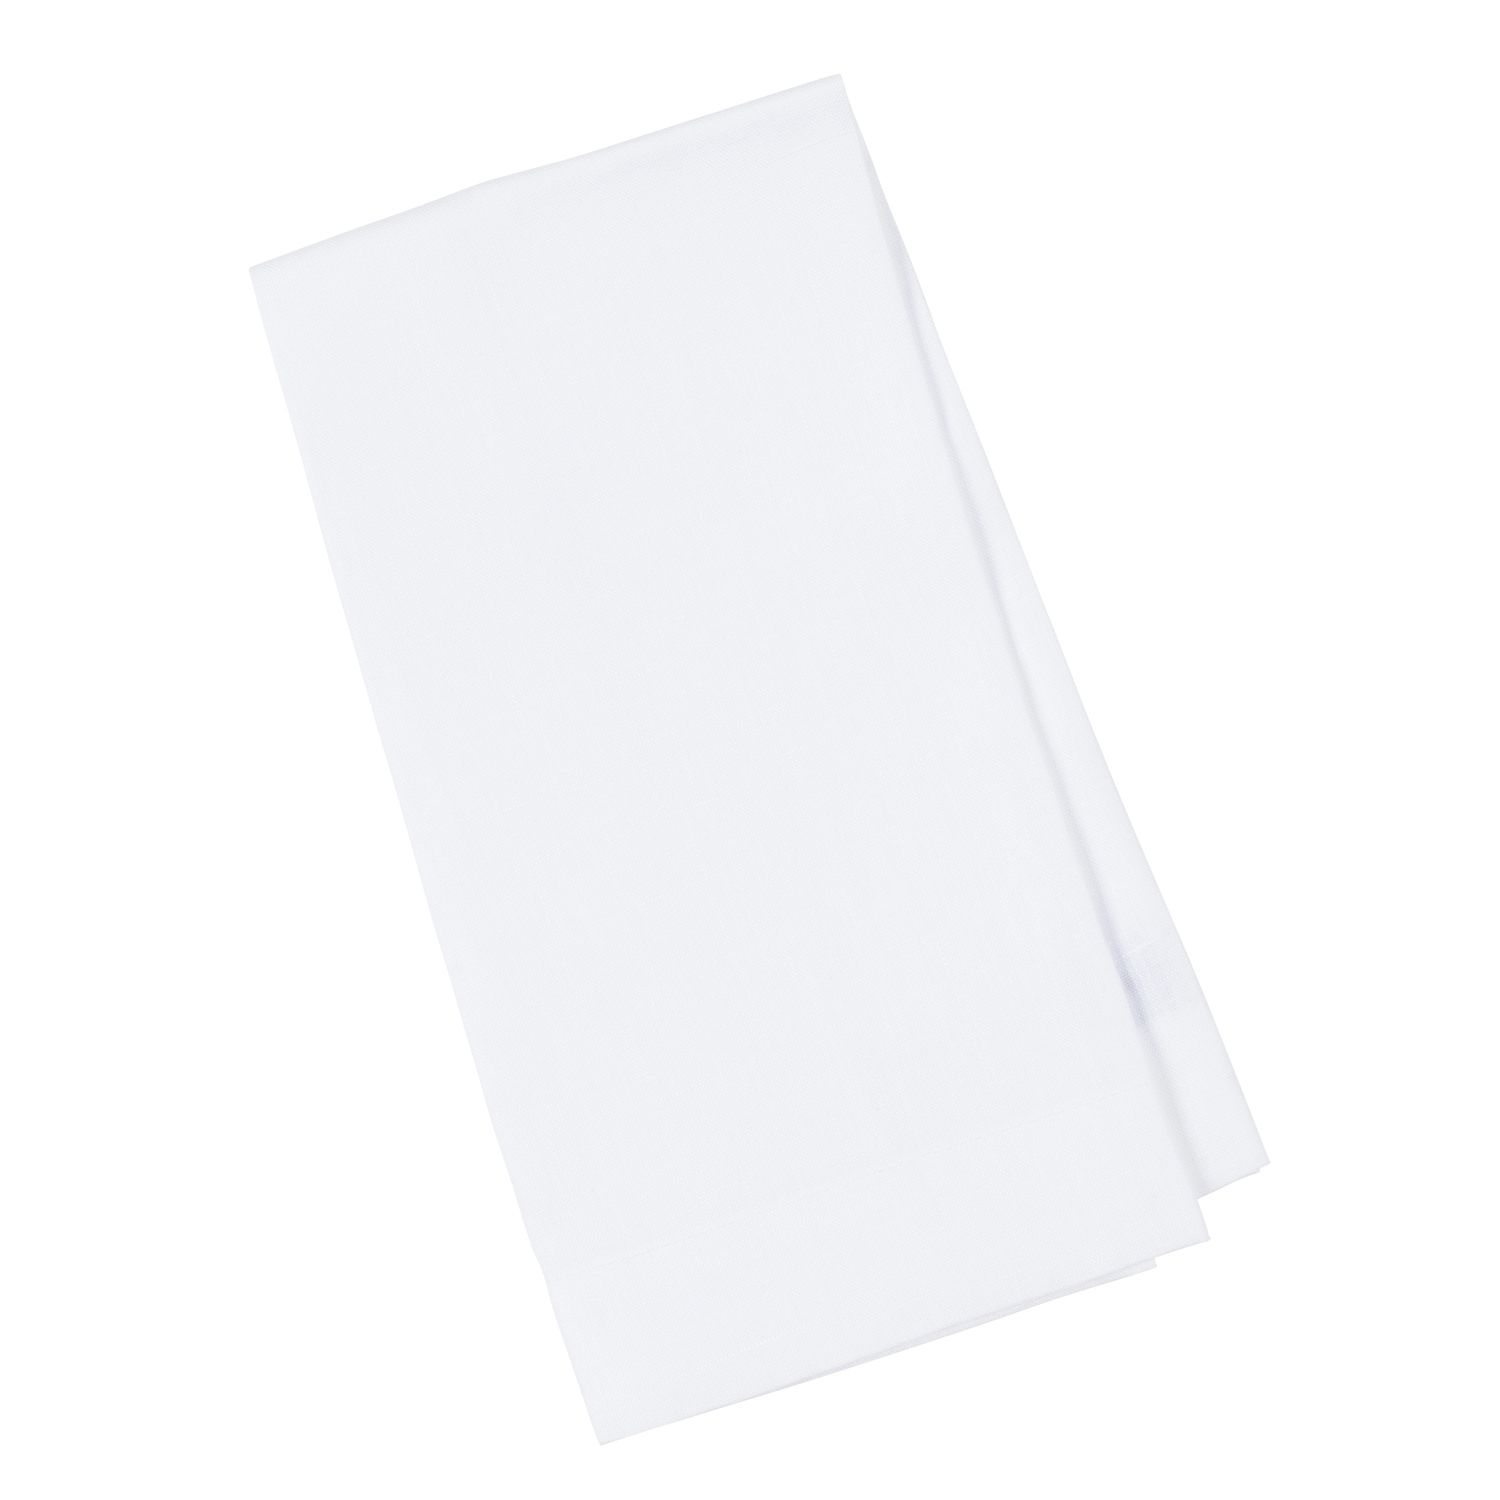 Classic White Linen Napkin - Top Quality Italian Made in US